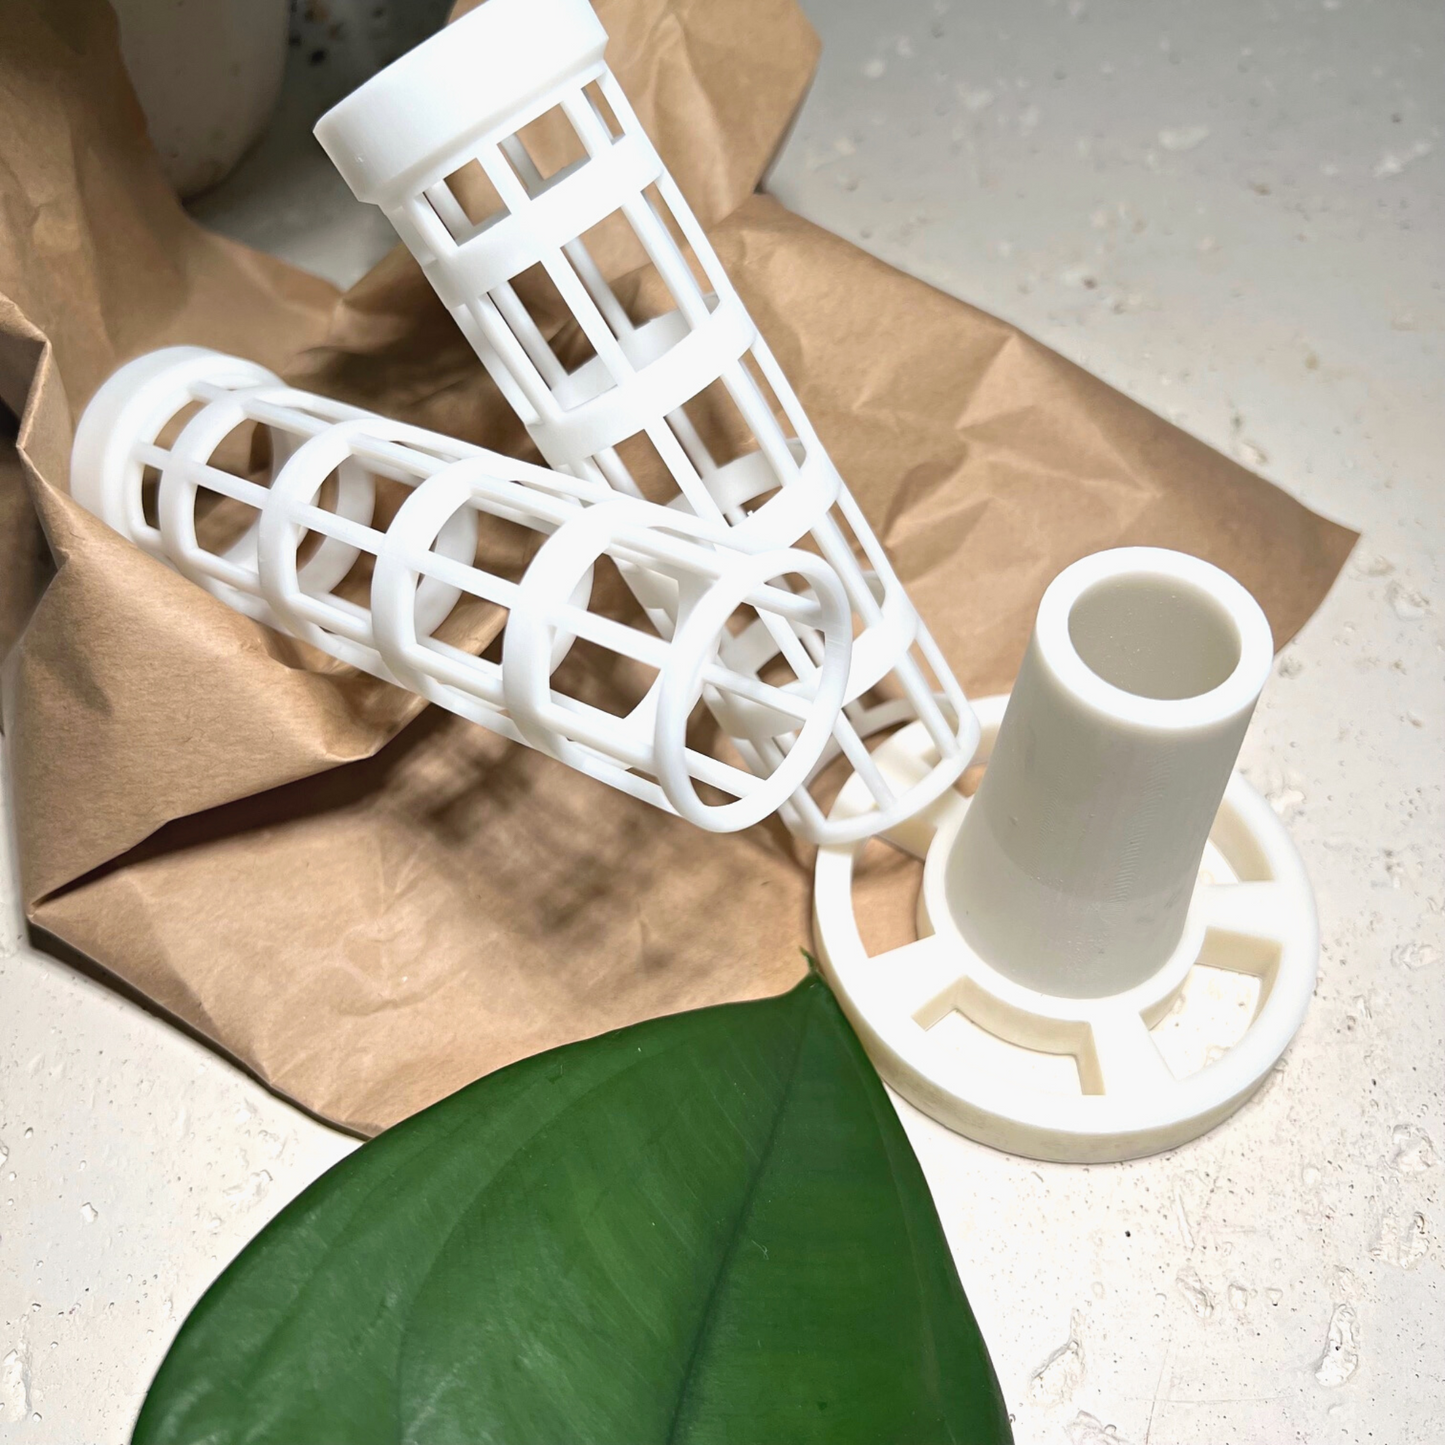 Birdy's Plants Modular Moss Pole 3D printed moss pole for plants with a Syngonium Chiapense houseplant.